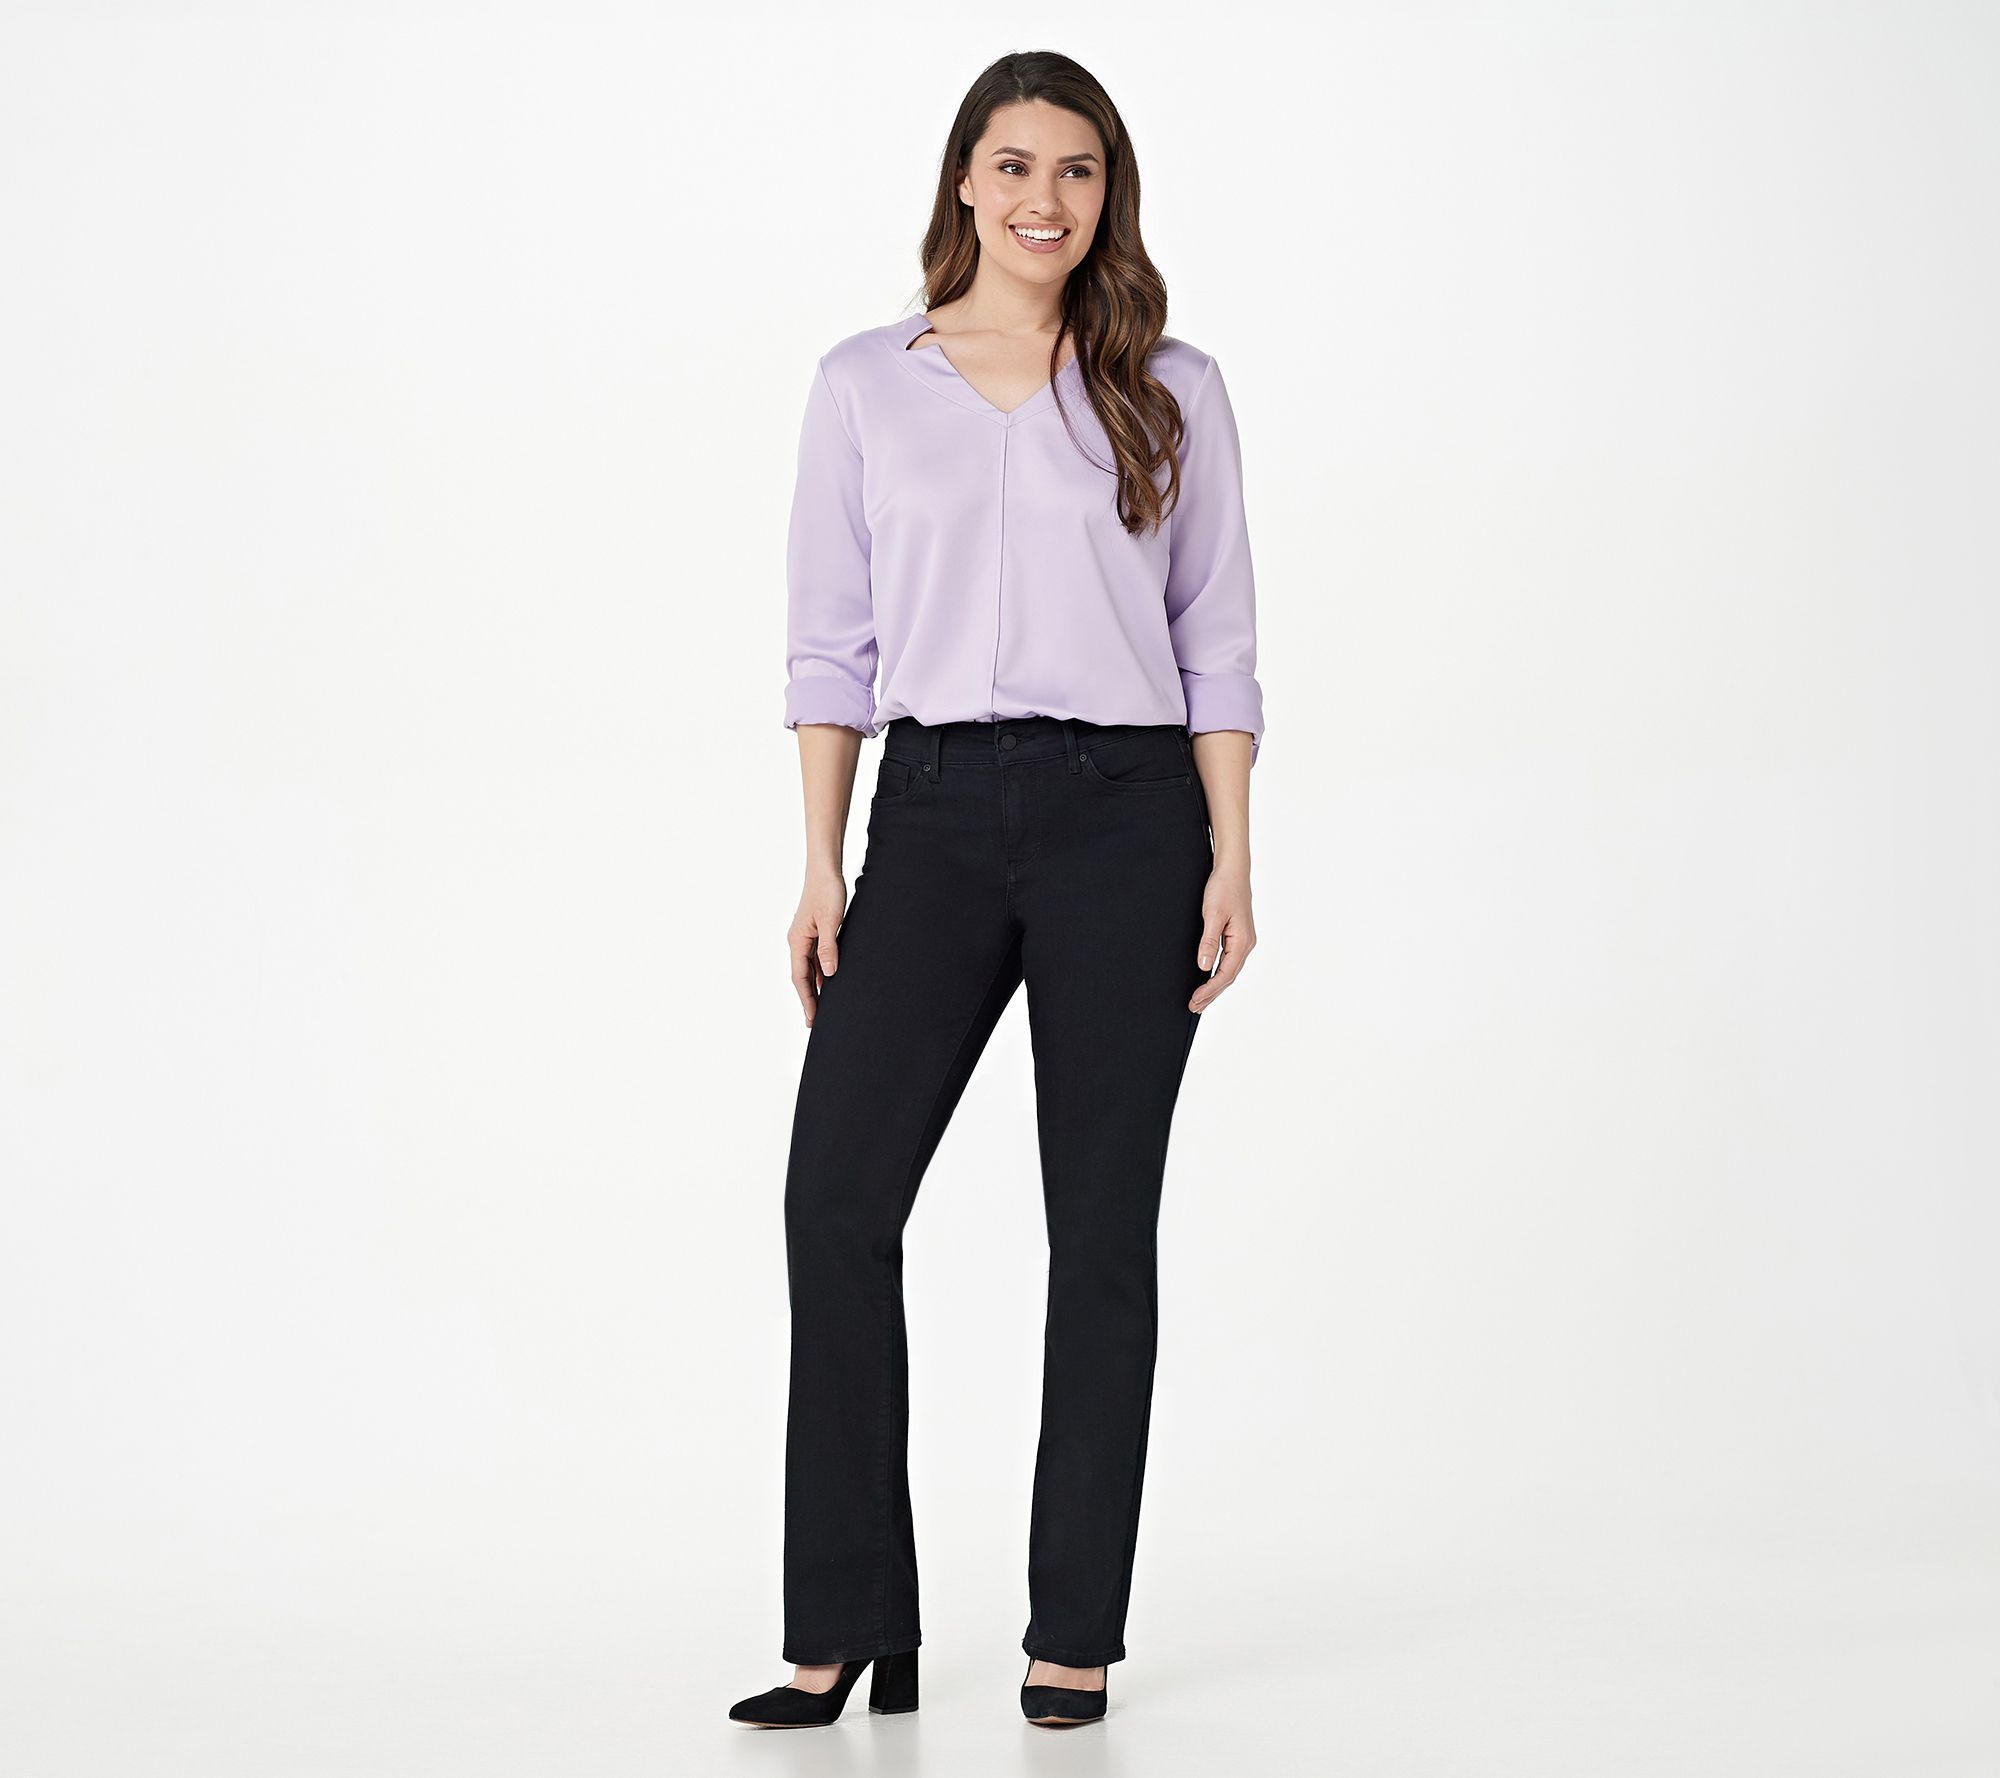 NYDJ Marilyn Straight Uplift Jeans in Cool Embrace- Nautilus - QVC.com